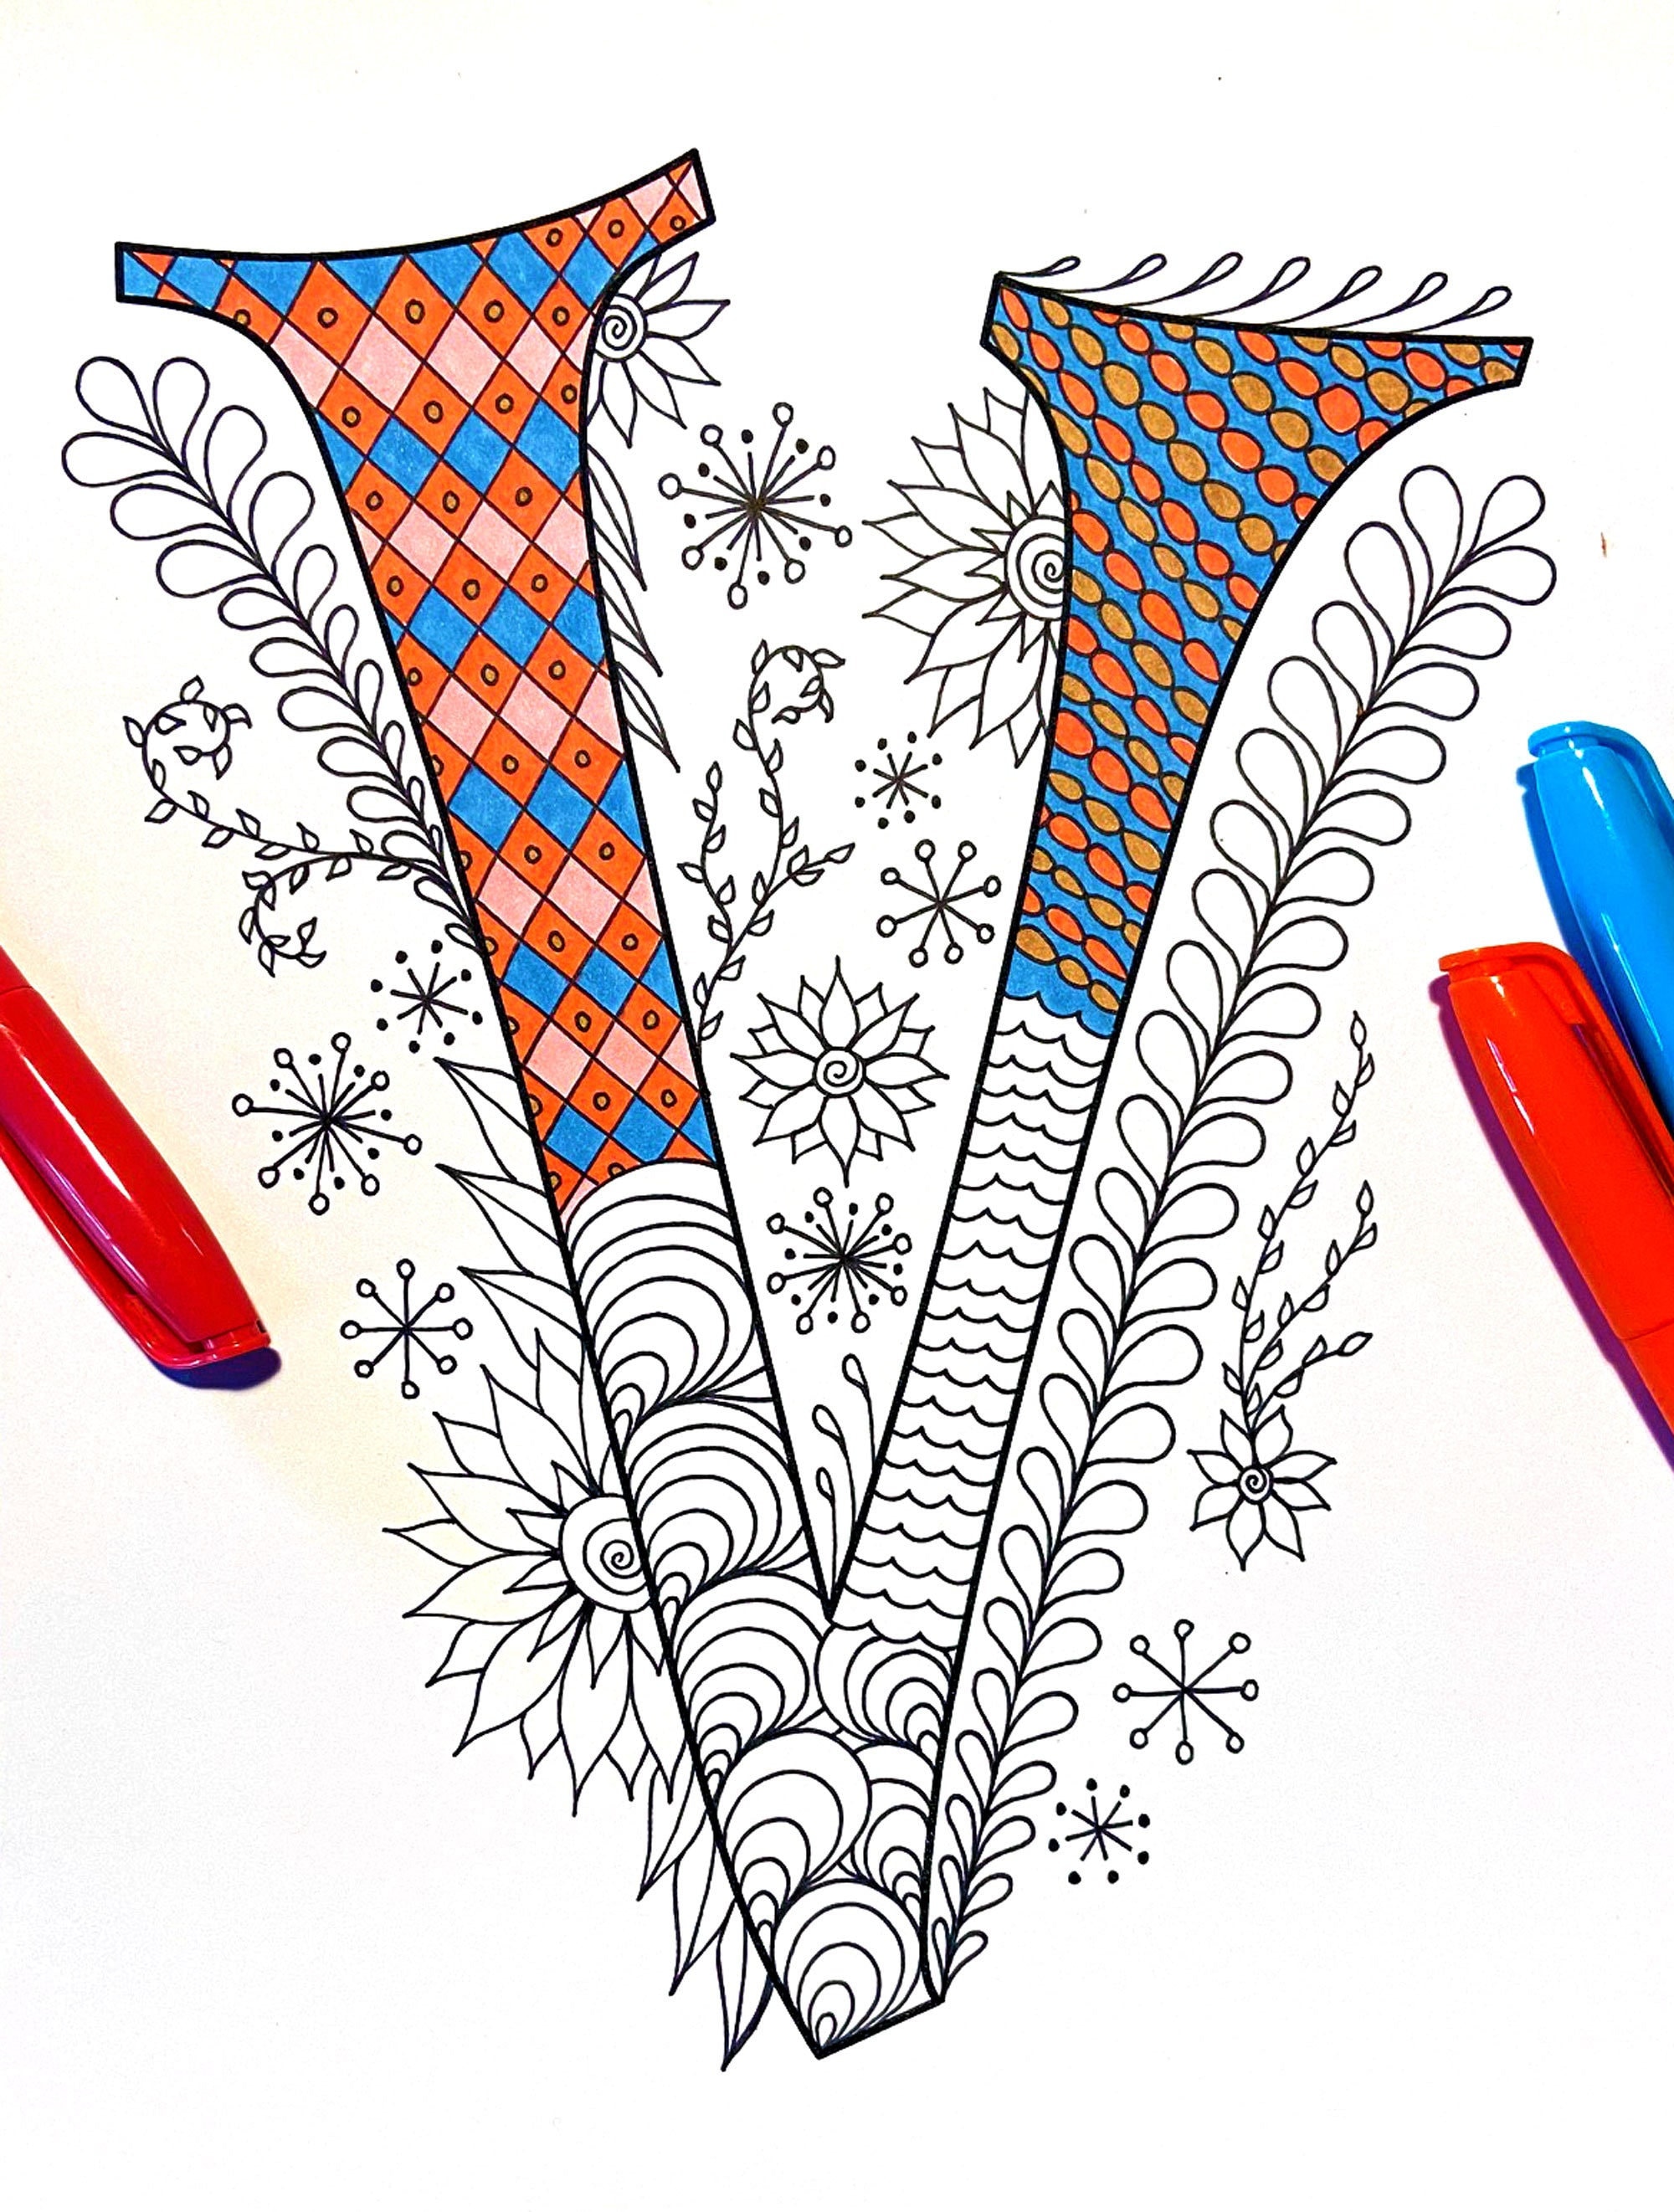 Retro Floral Letter S Coloring Page Inspired by the font Mystery Quest